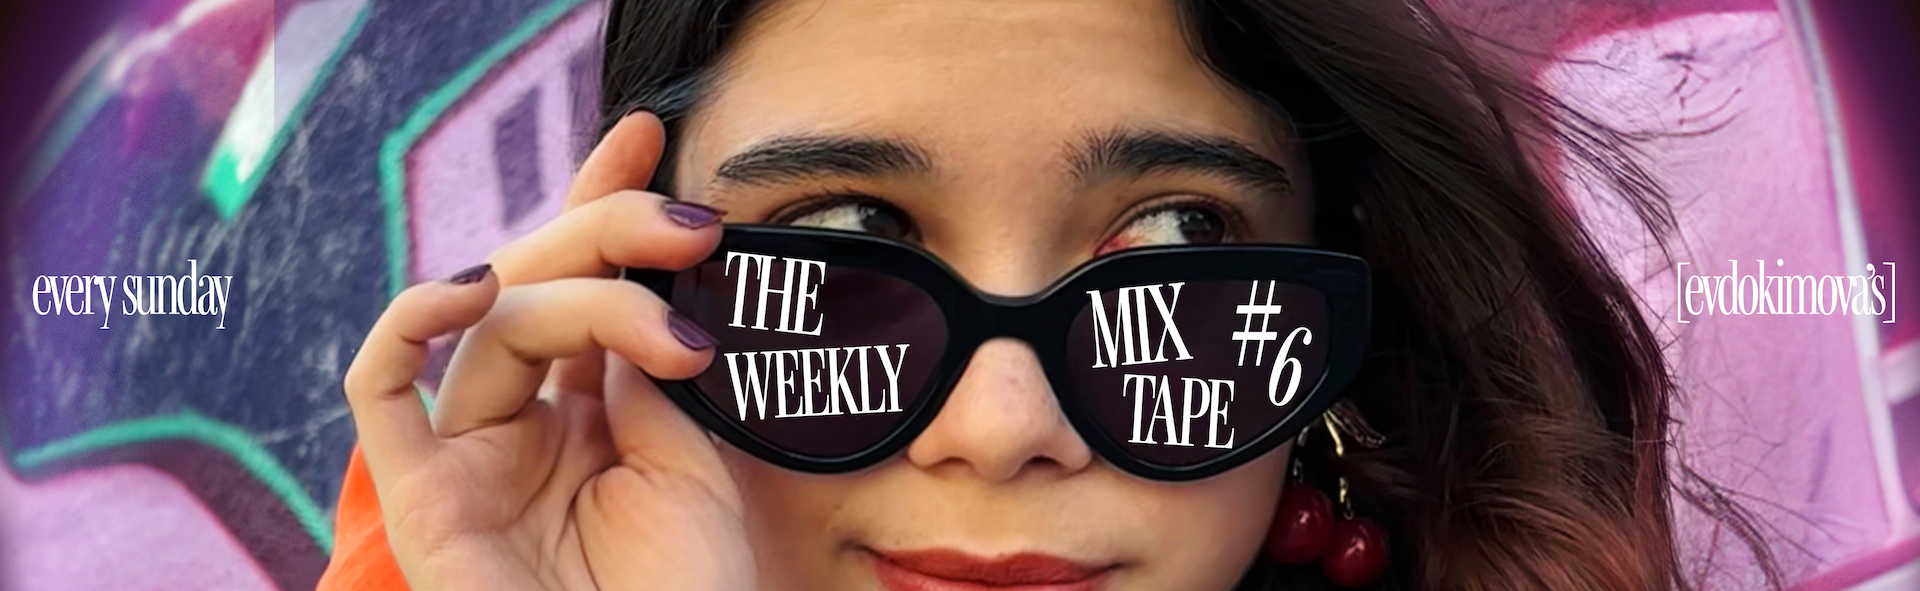 The weekly mixtape of discoveries in slightly exaggerated headlines #6